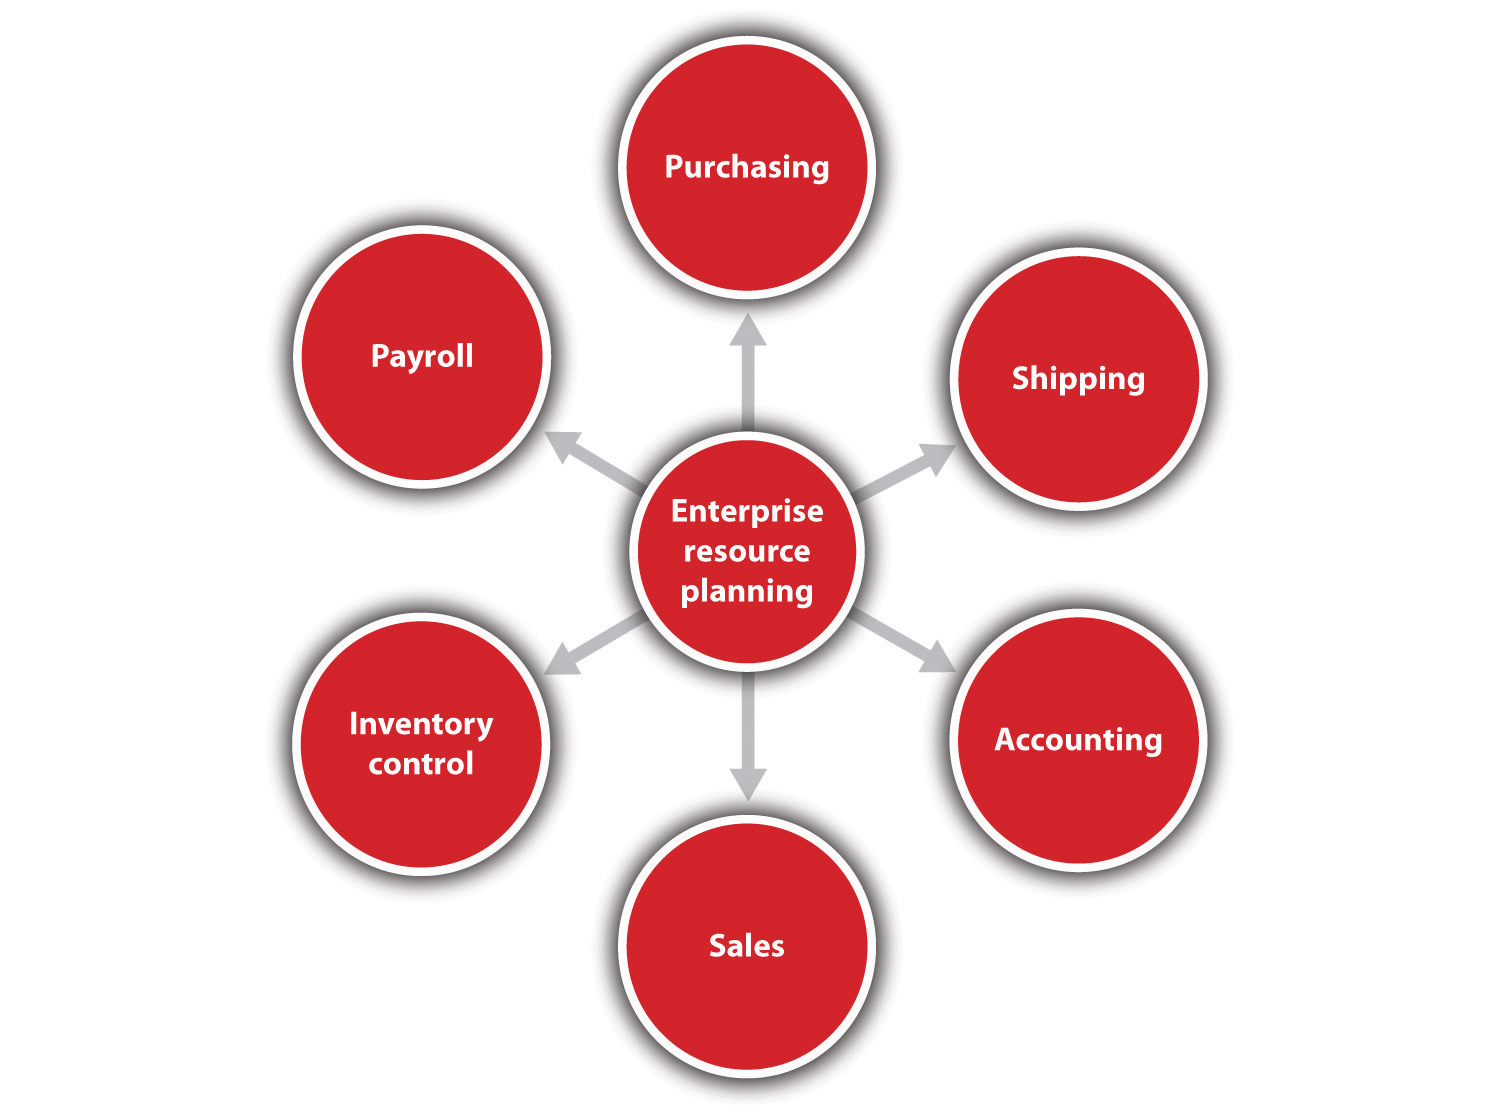 Enterprise resources planning covers sales, inventory control, payroll, purchasing, shipping and accounting